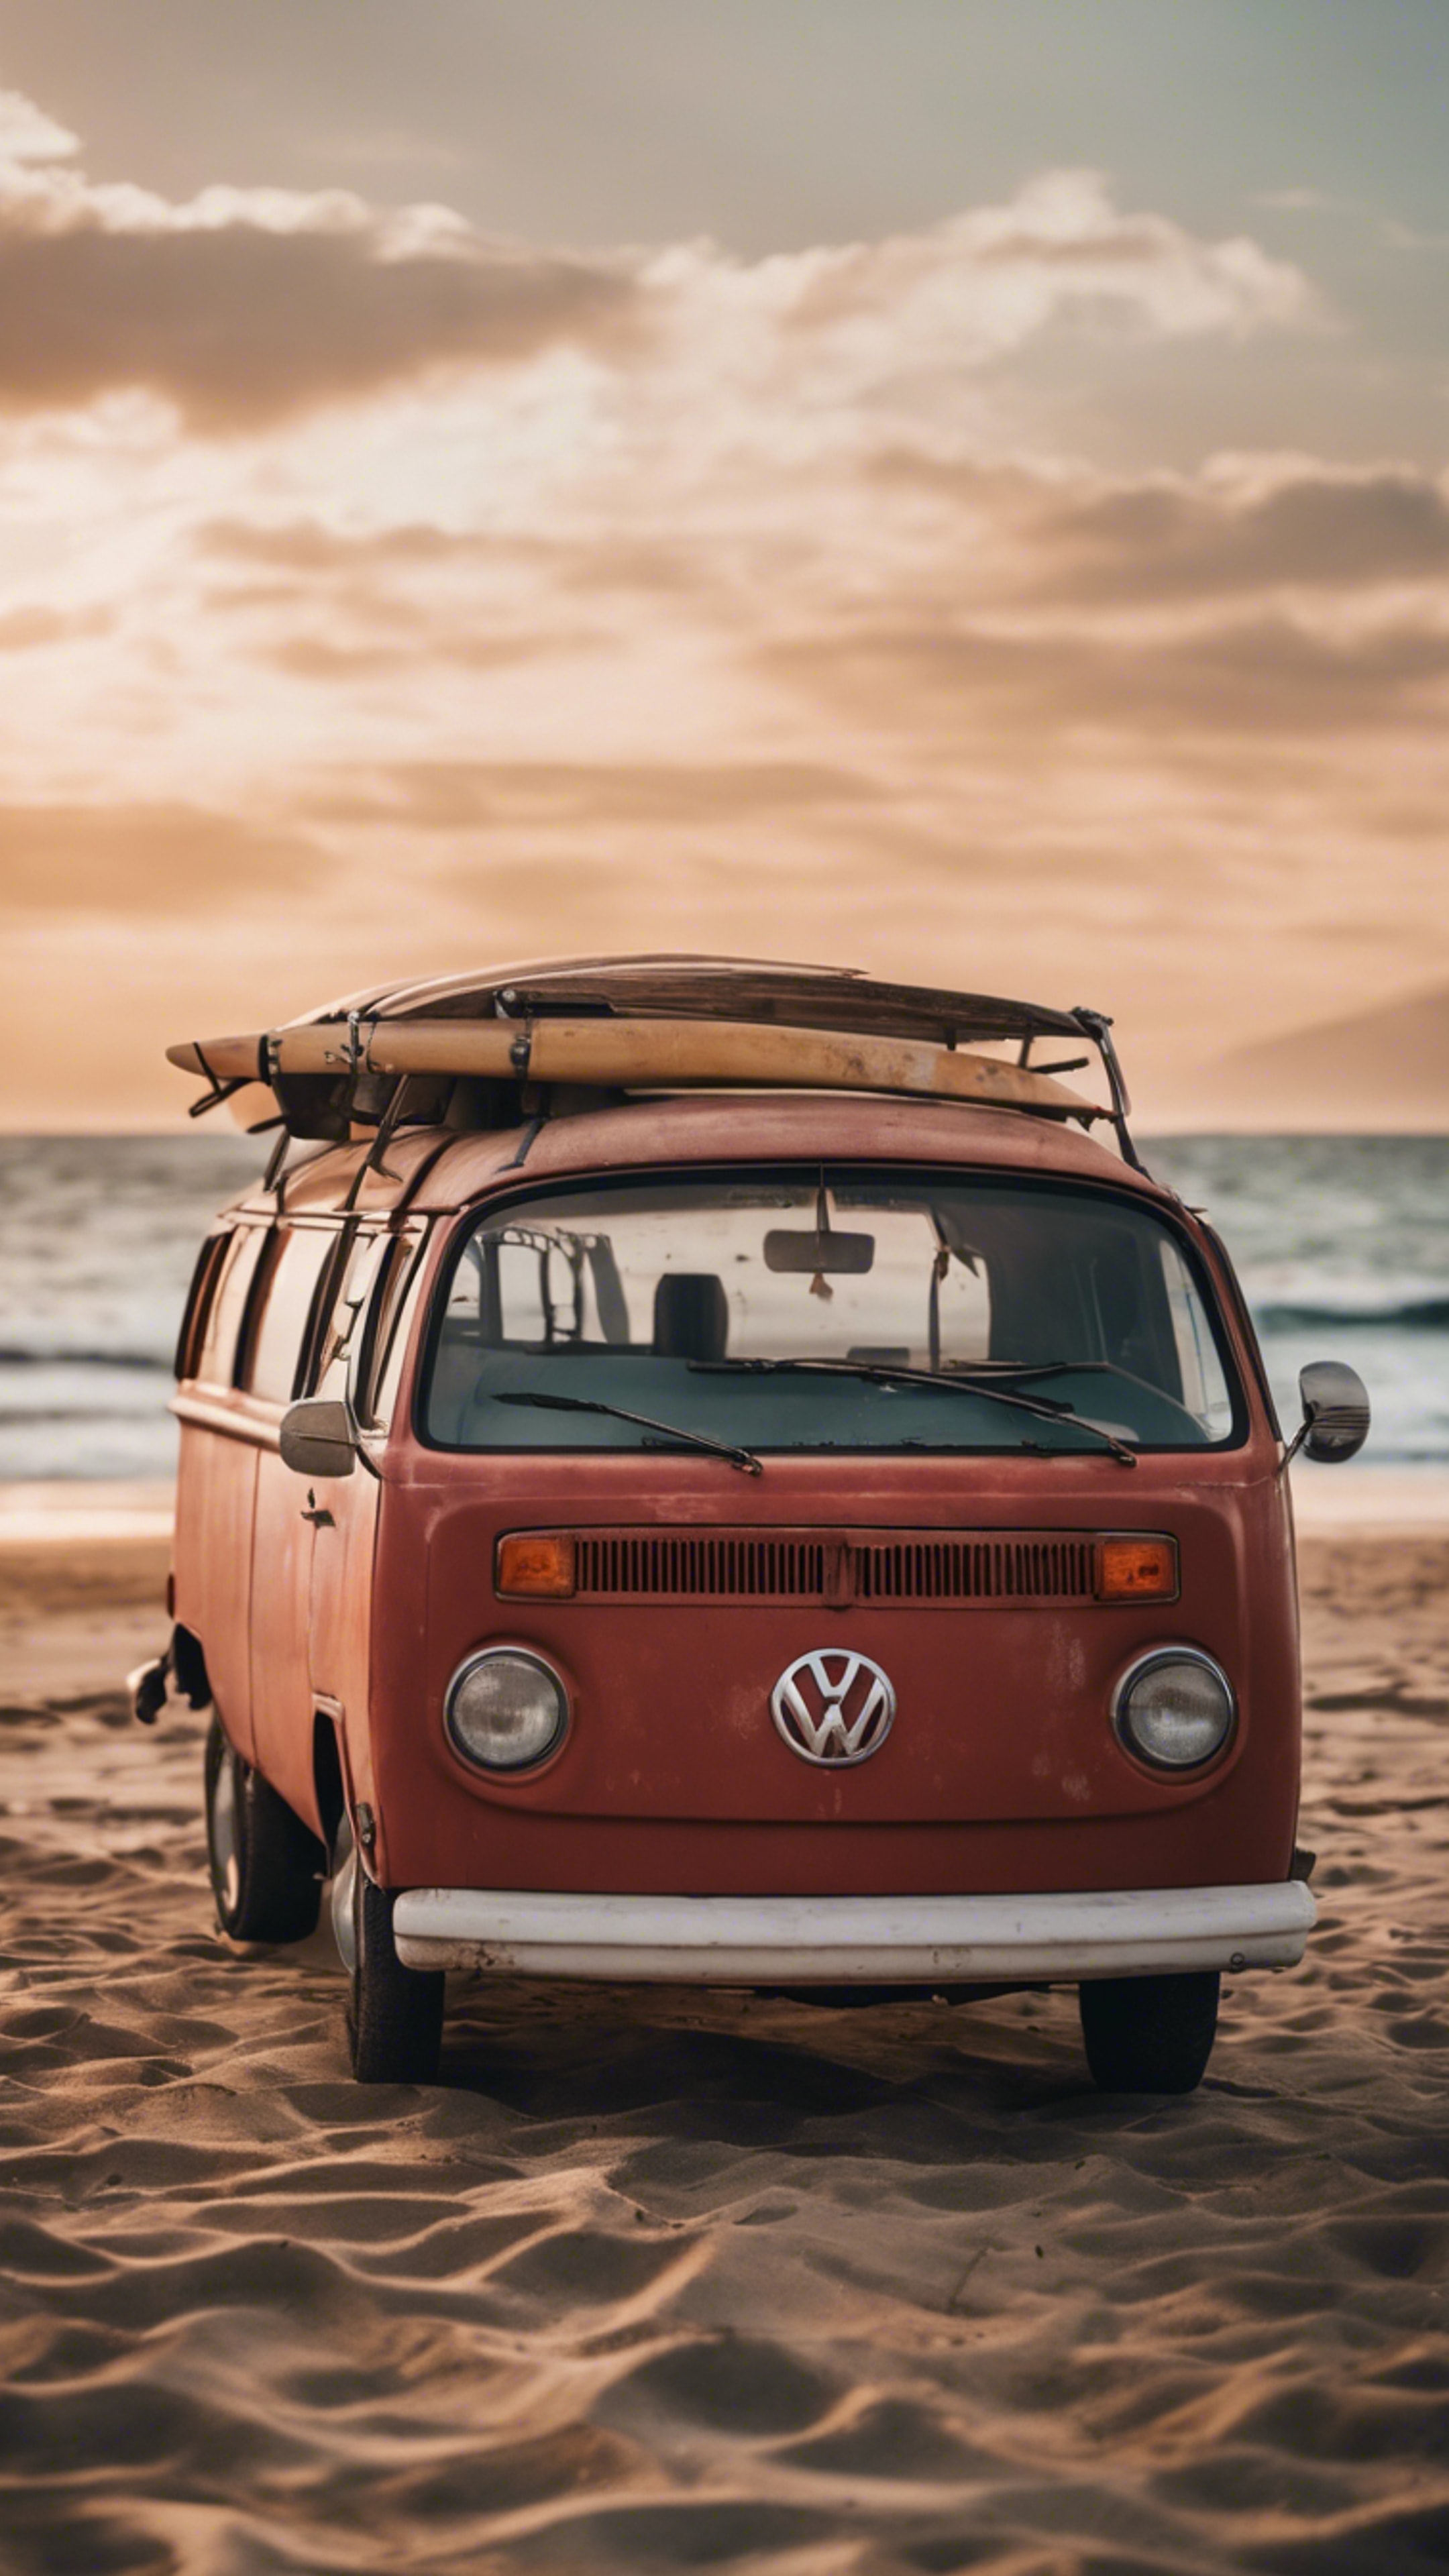 An old, rusted red Volkswagen van parked at a beach with the sunset in the backdrop, surfboards leaning against it. Обои[f96813b3e584499cadbf]